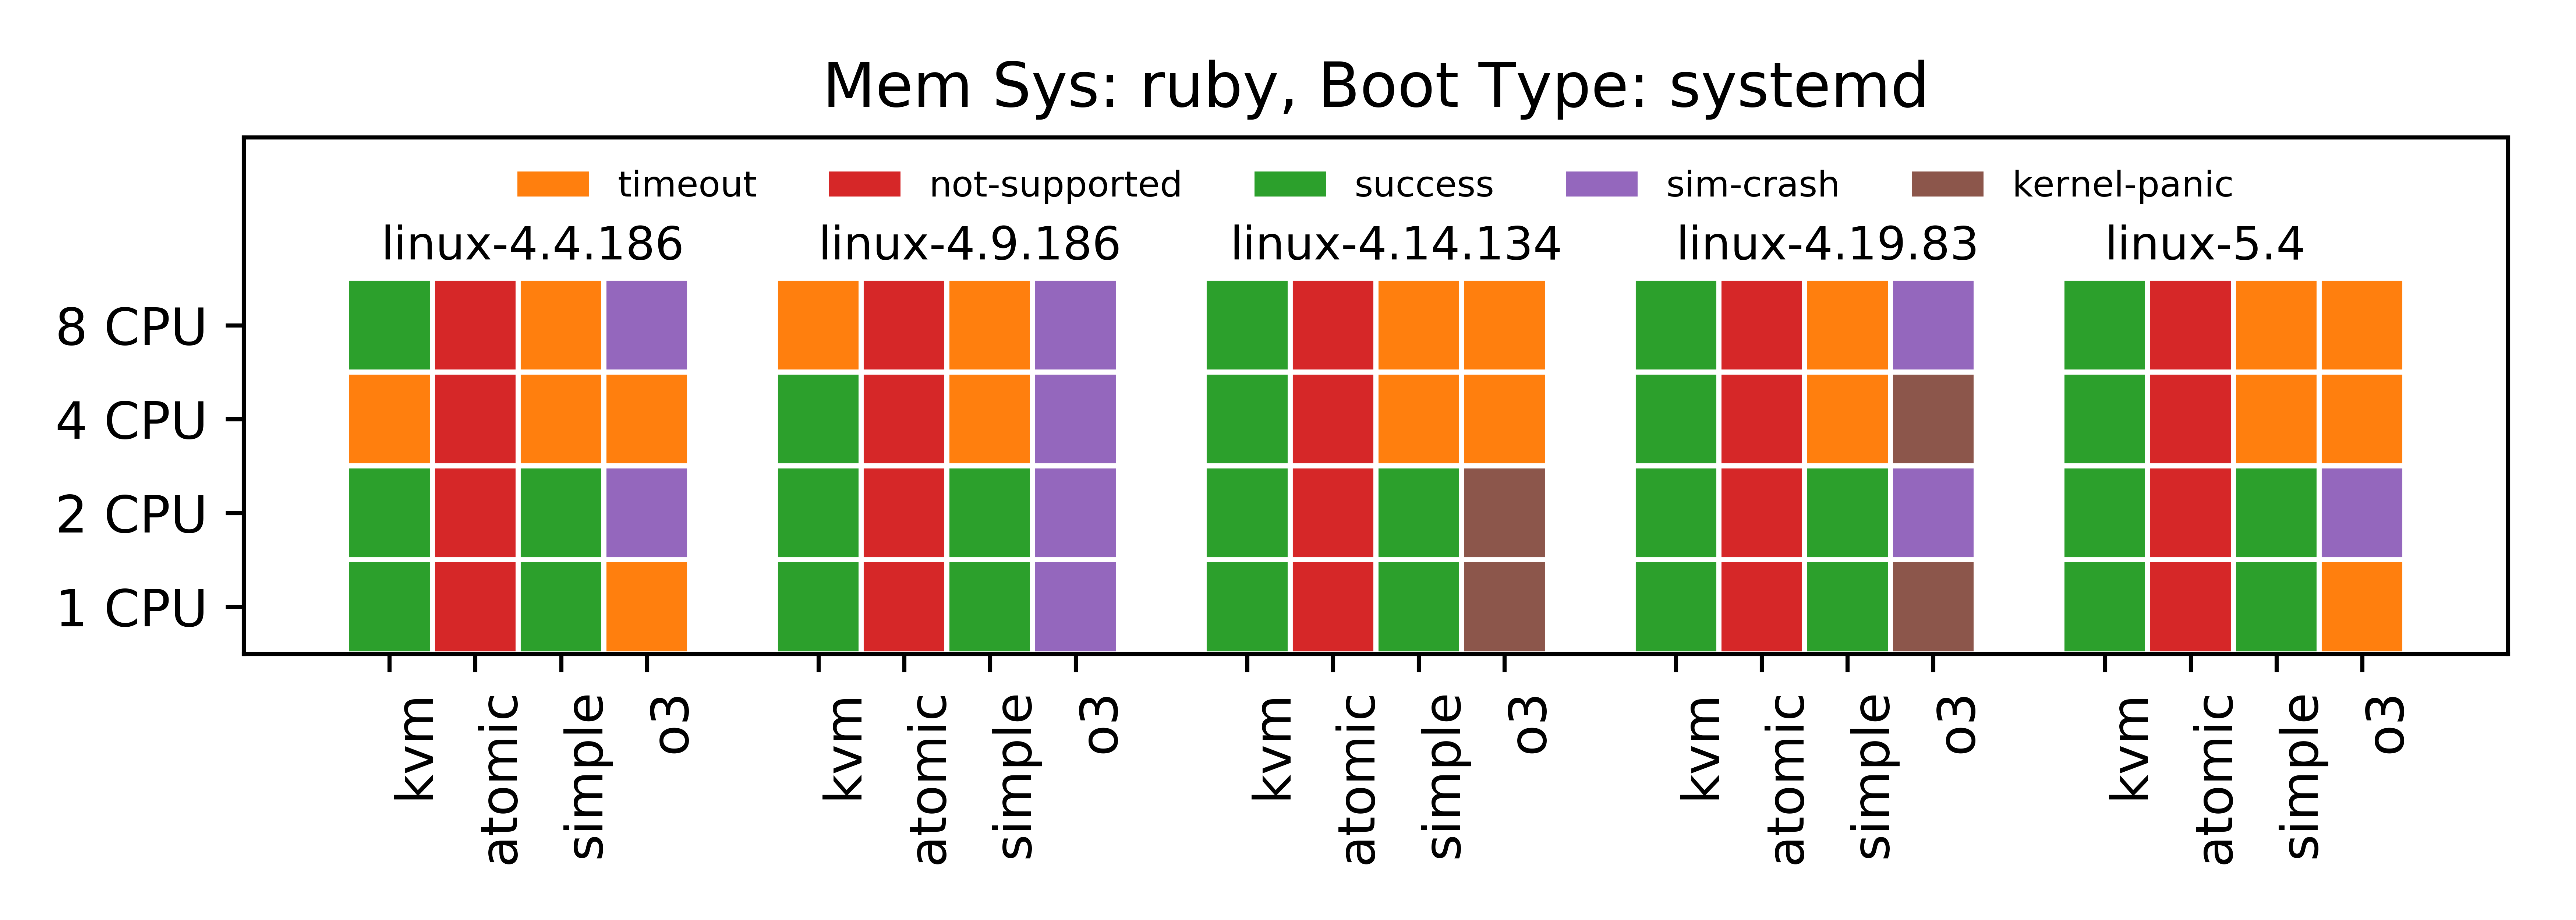 Linux boot status for ruby memory system and systemd boot